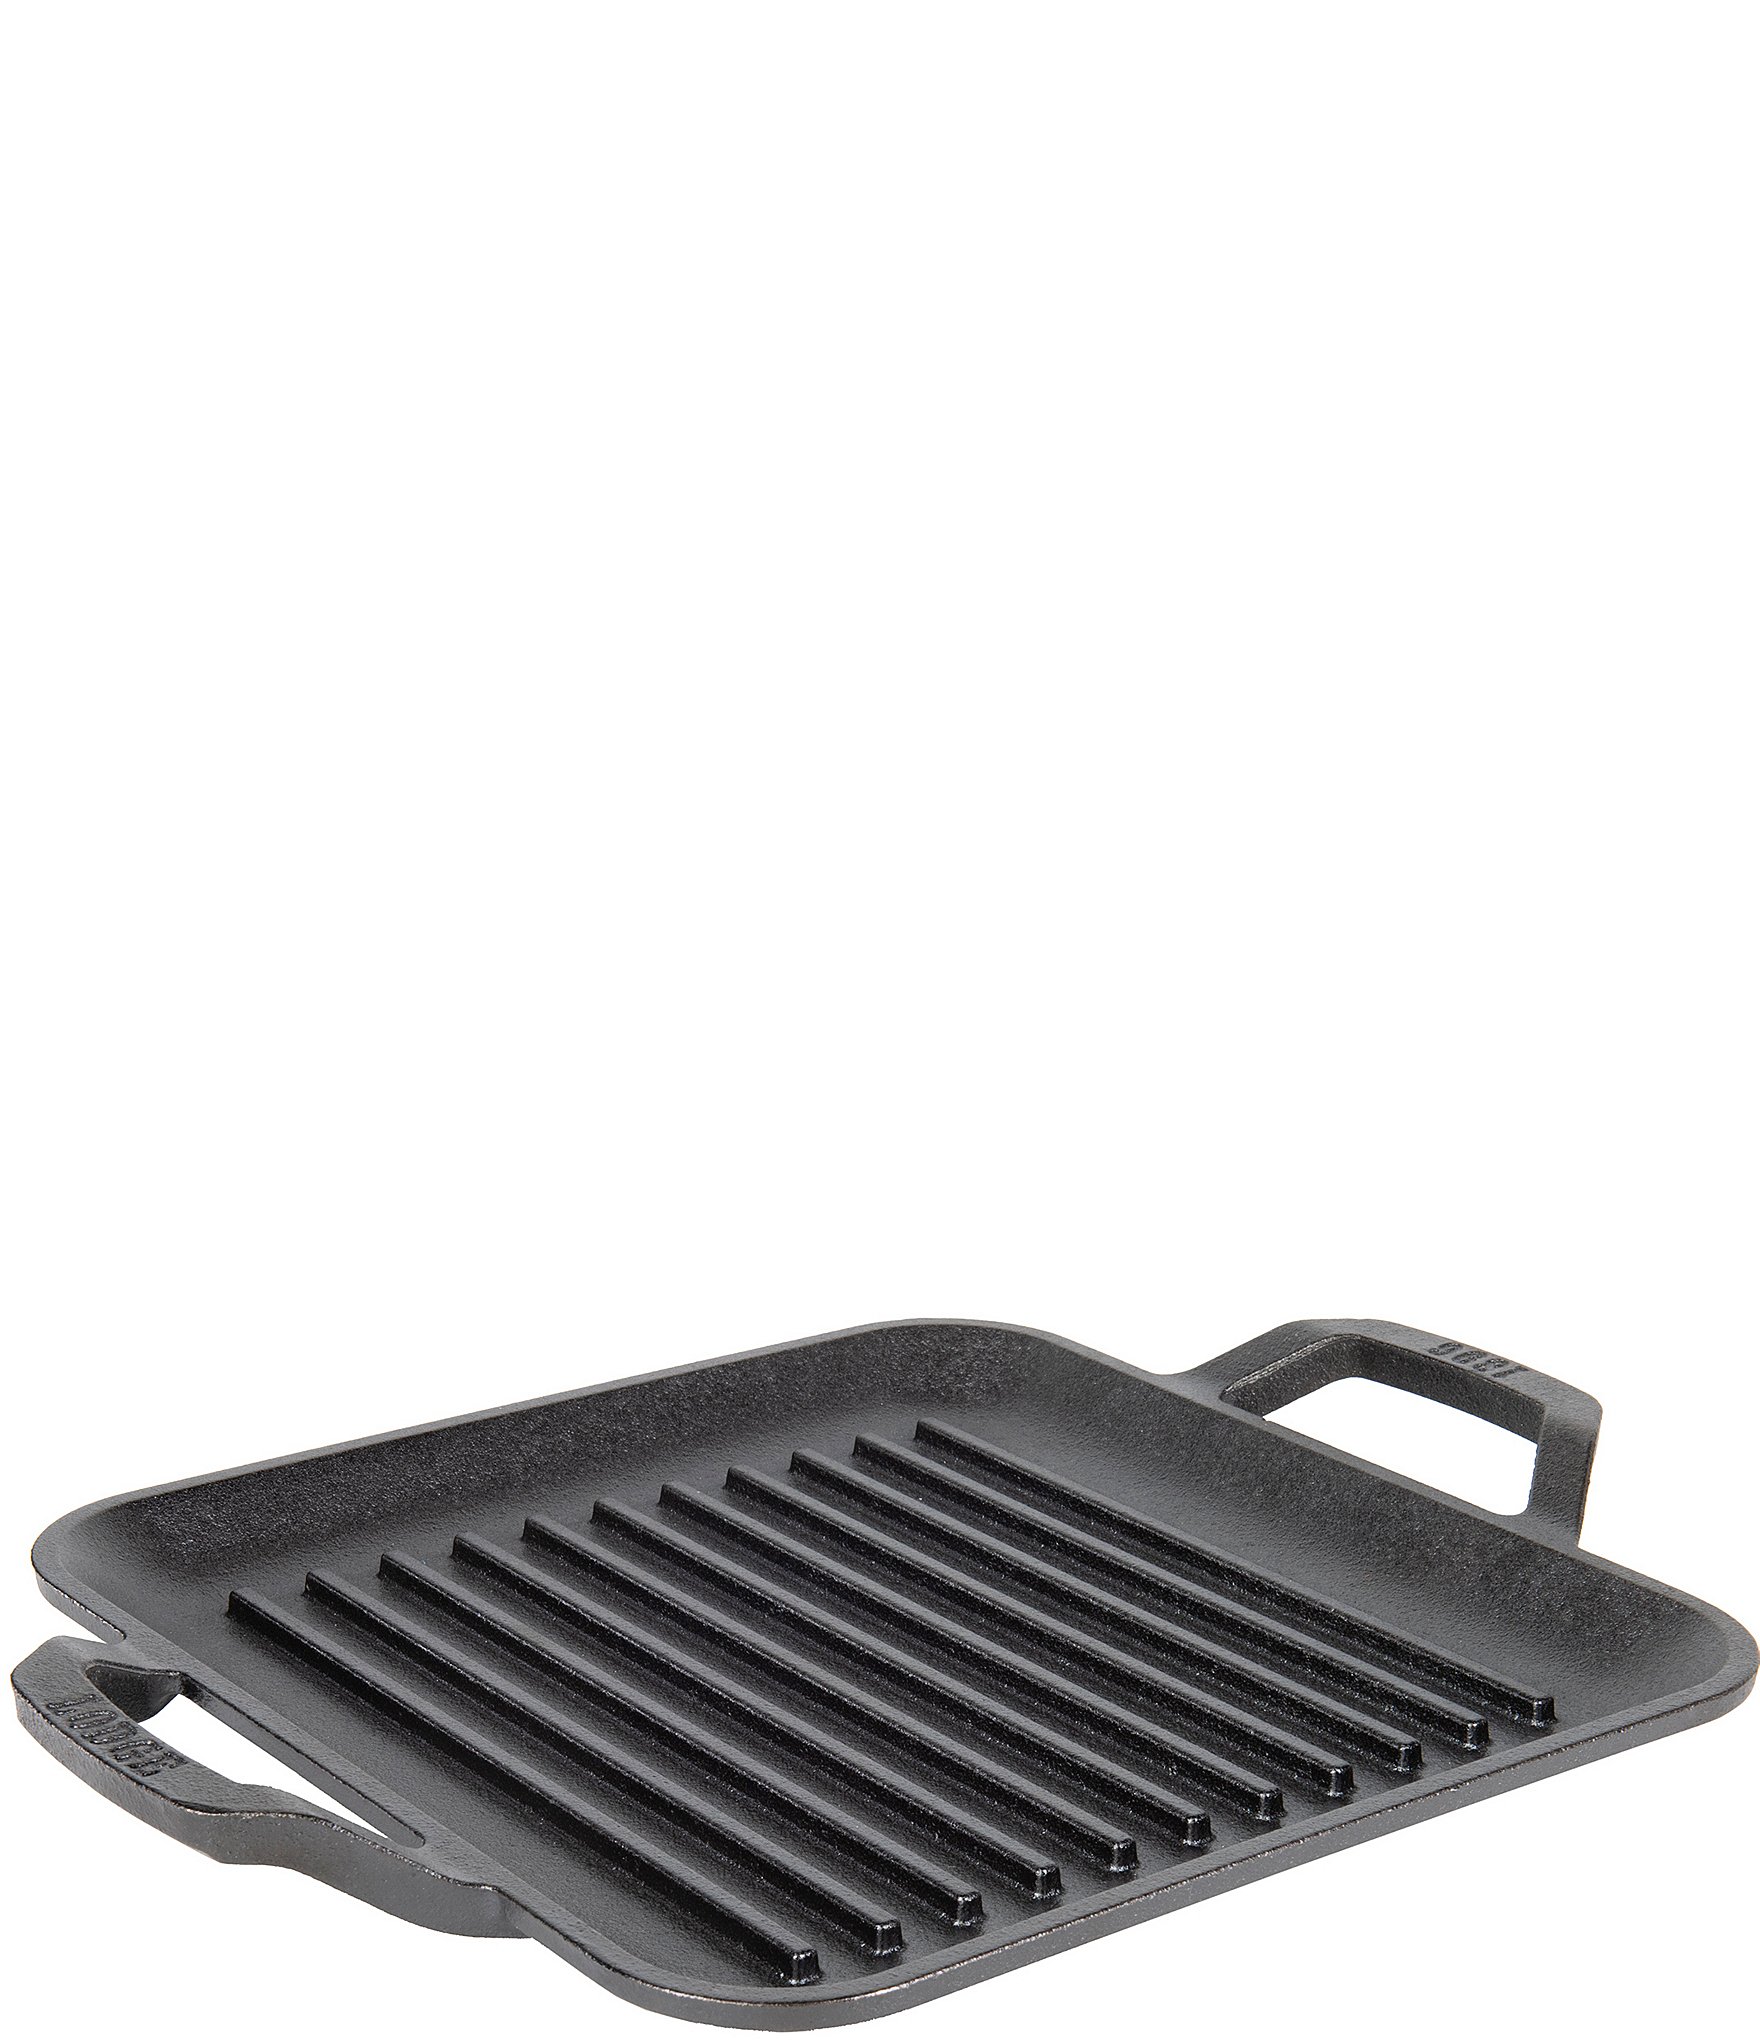 NutriChef Nonstick Cast Iron Grill Pan - 11-Inch Kitchen Square Cast Iron  Skillet Grilling Pan, Enameled Cast Iron Skillet Steak Pan w/ Side Drip